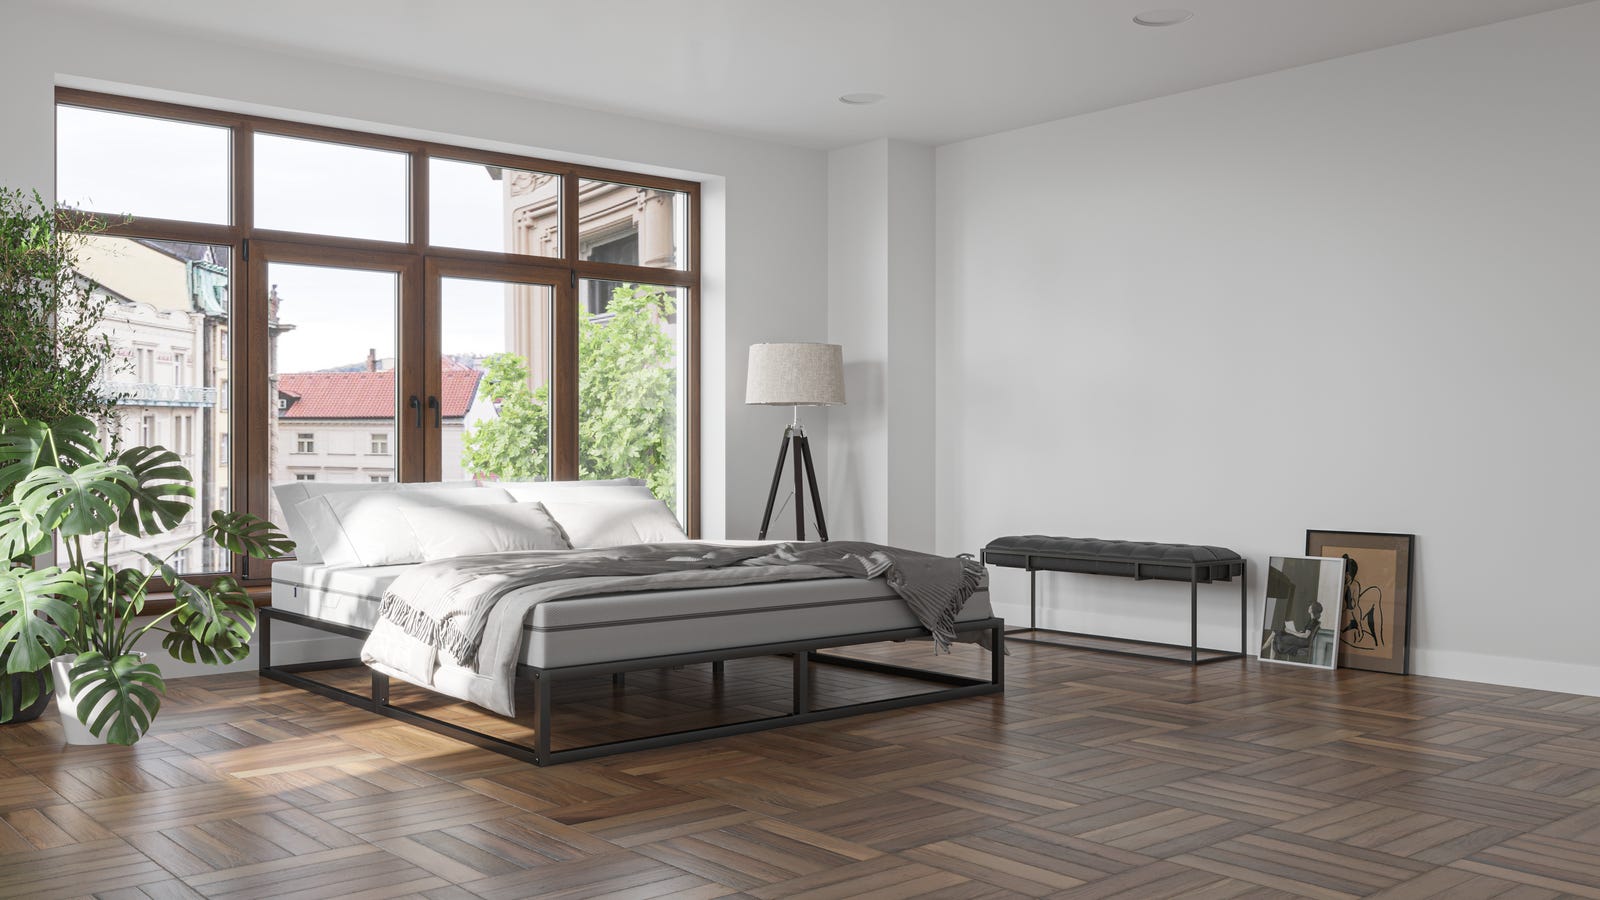 Metal-bed-base-side-view-parquet